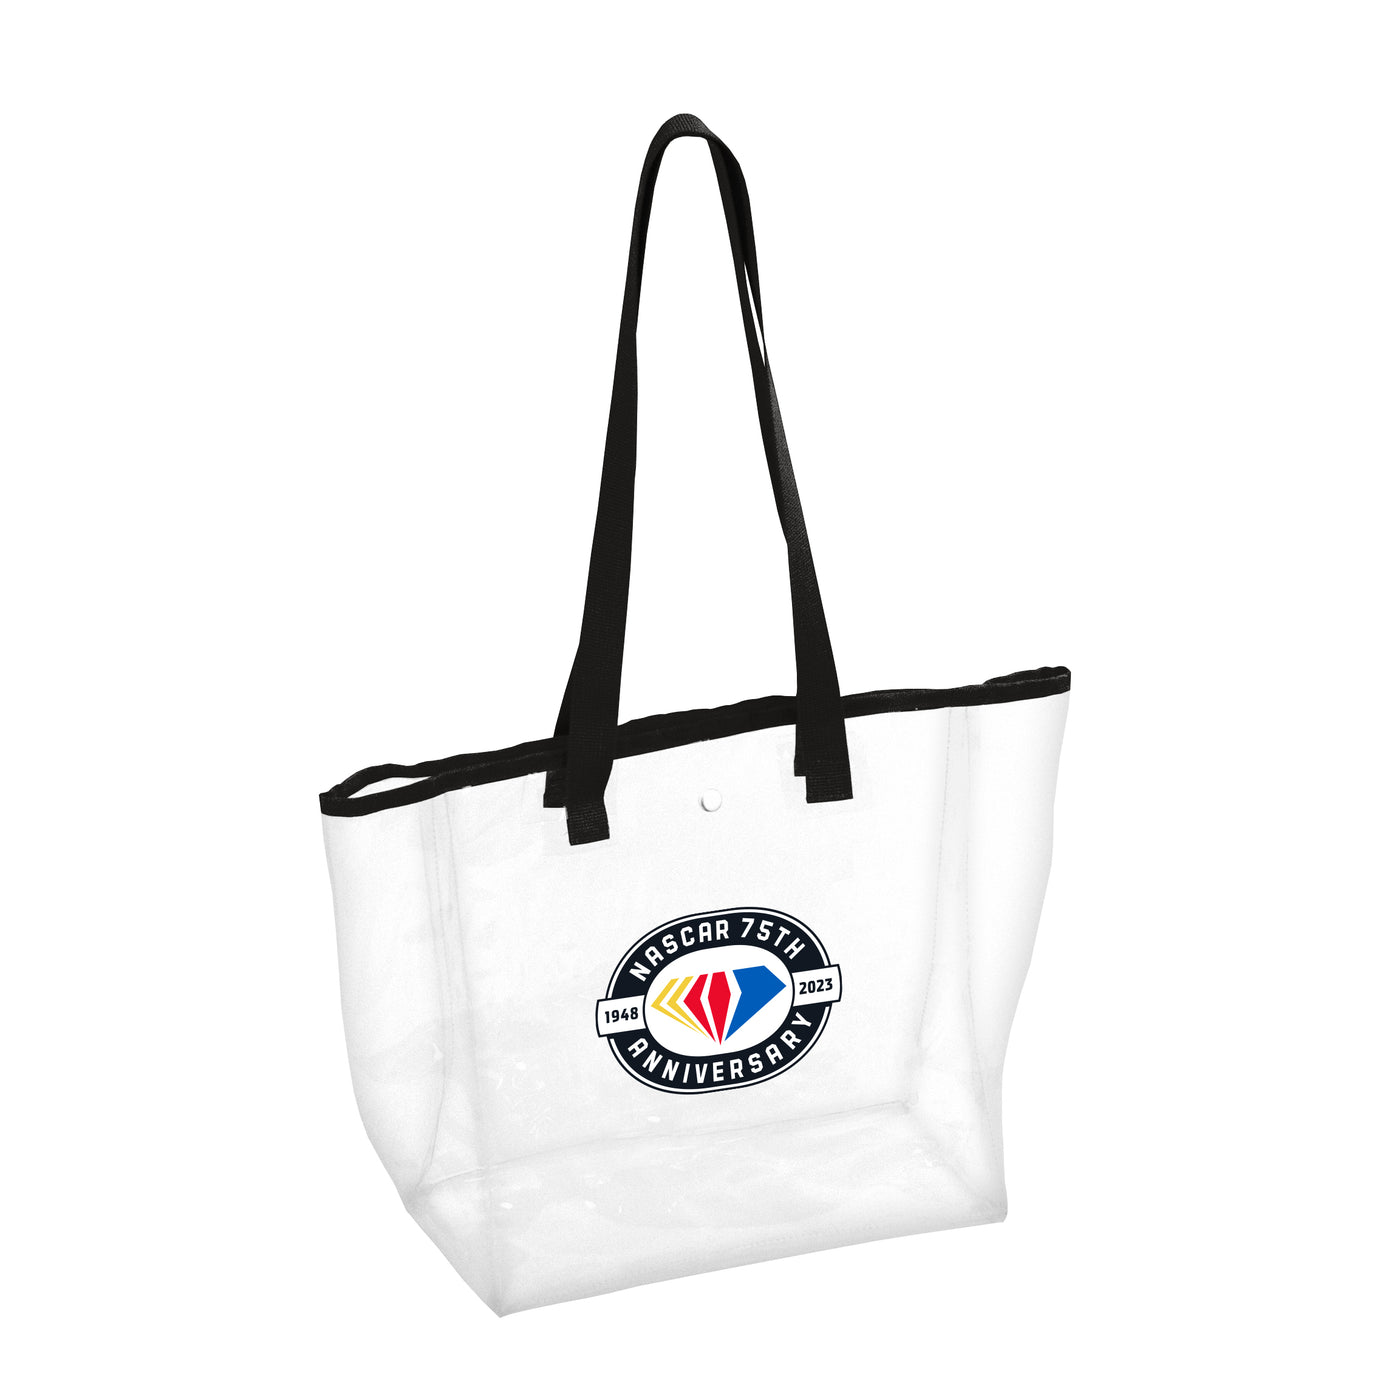 Nascar 75TH Anniversary Clear Tote